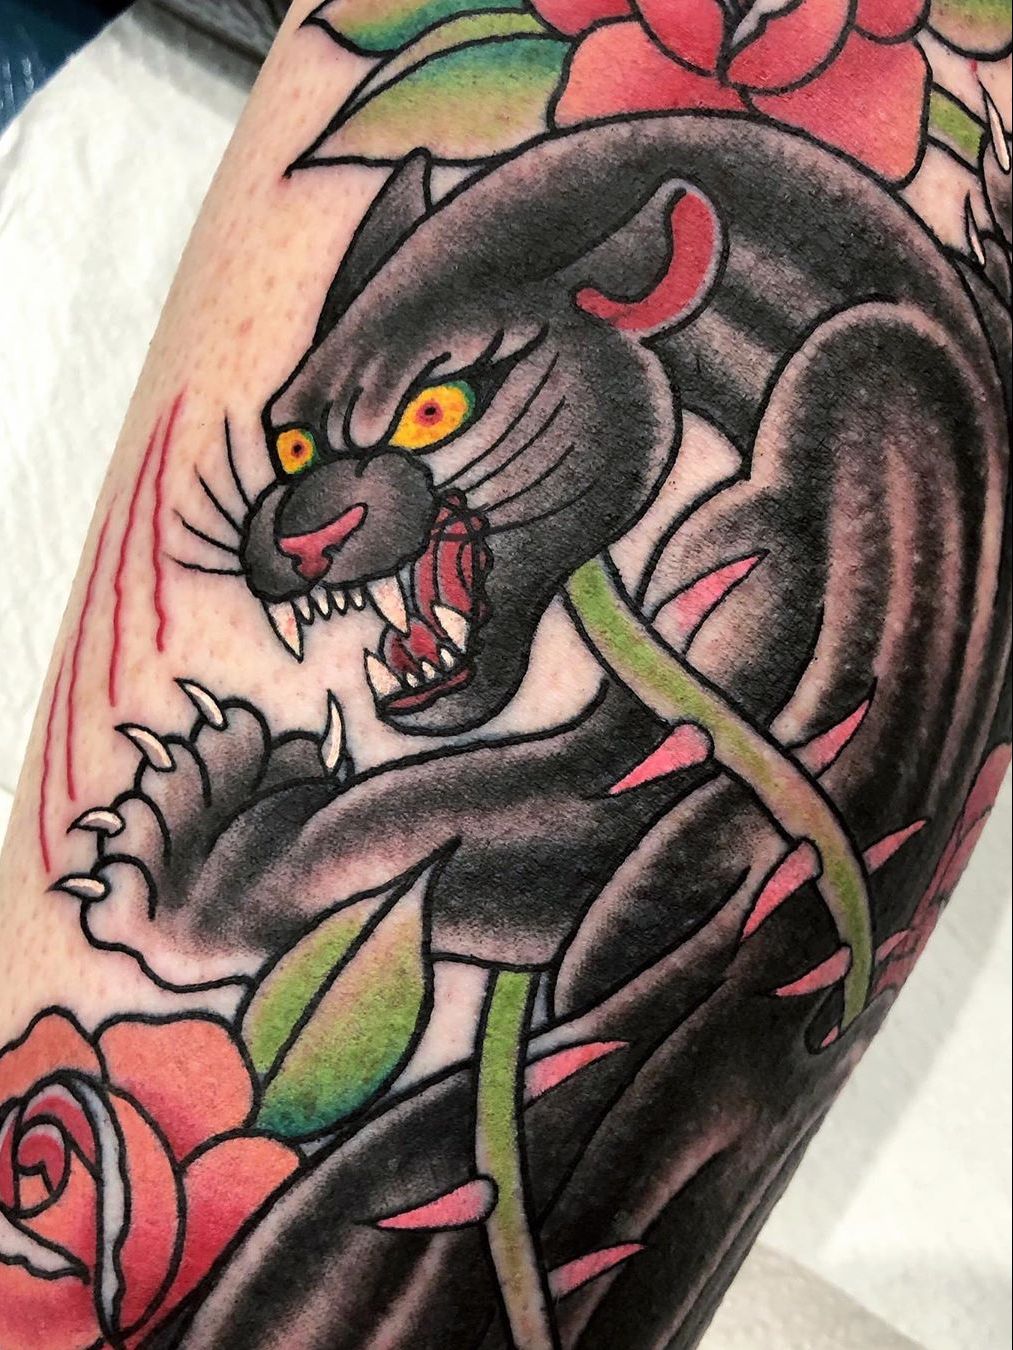 Classic panther by @lukejinks - Tattoogrid.net